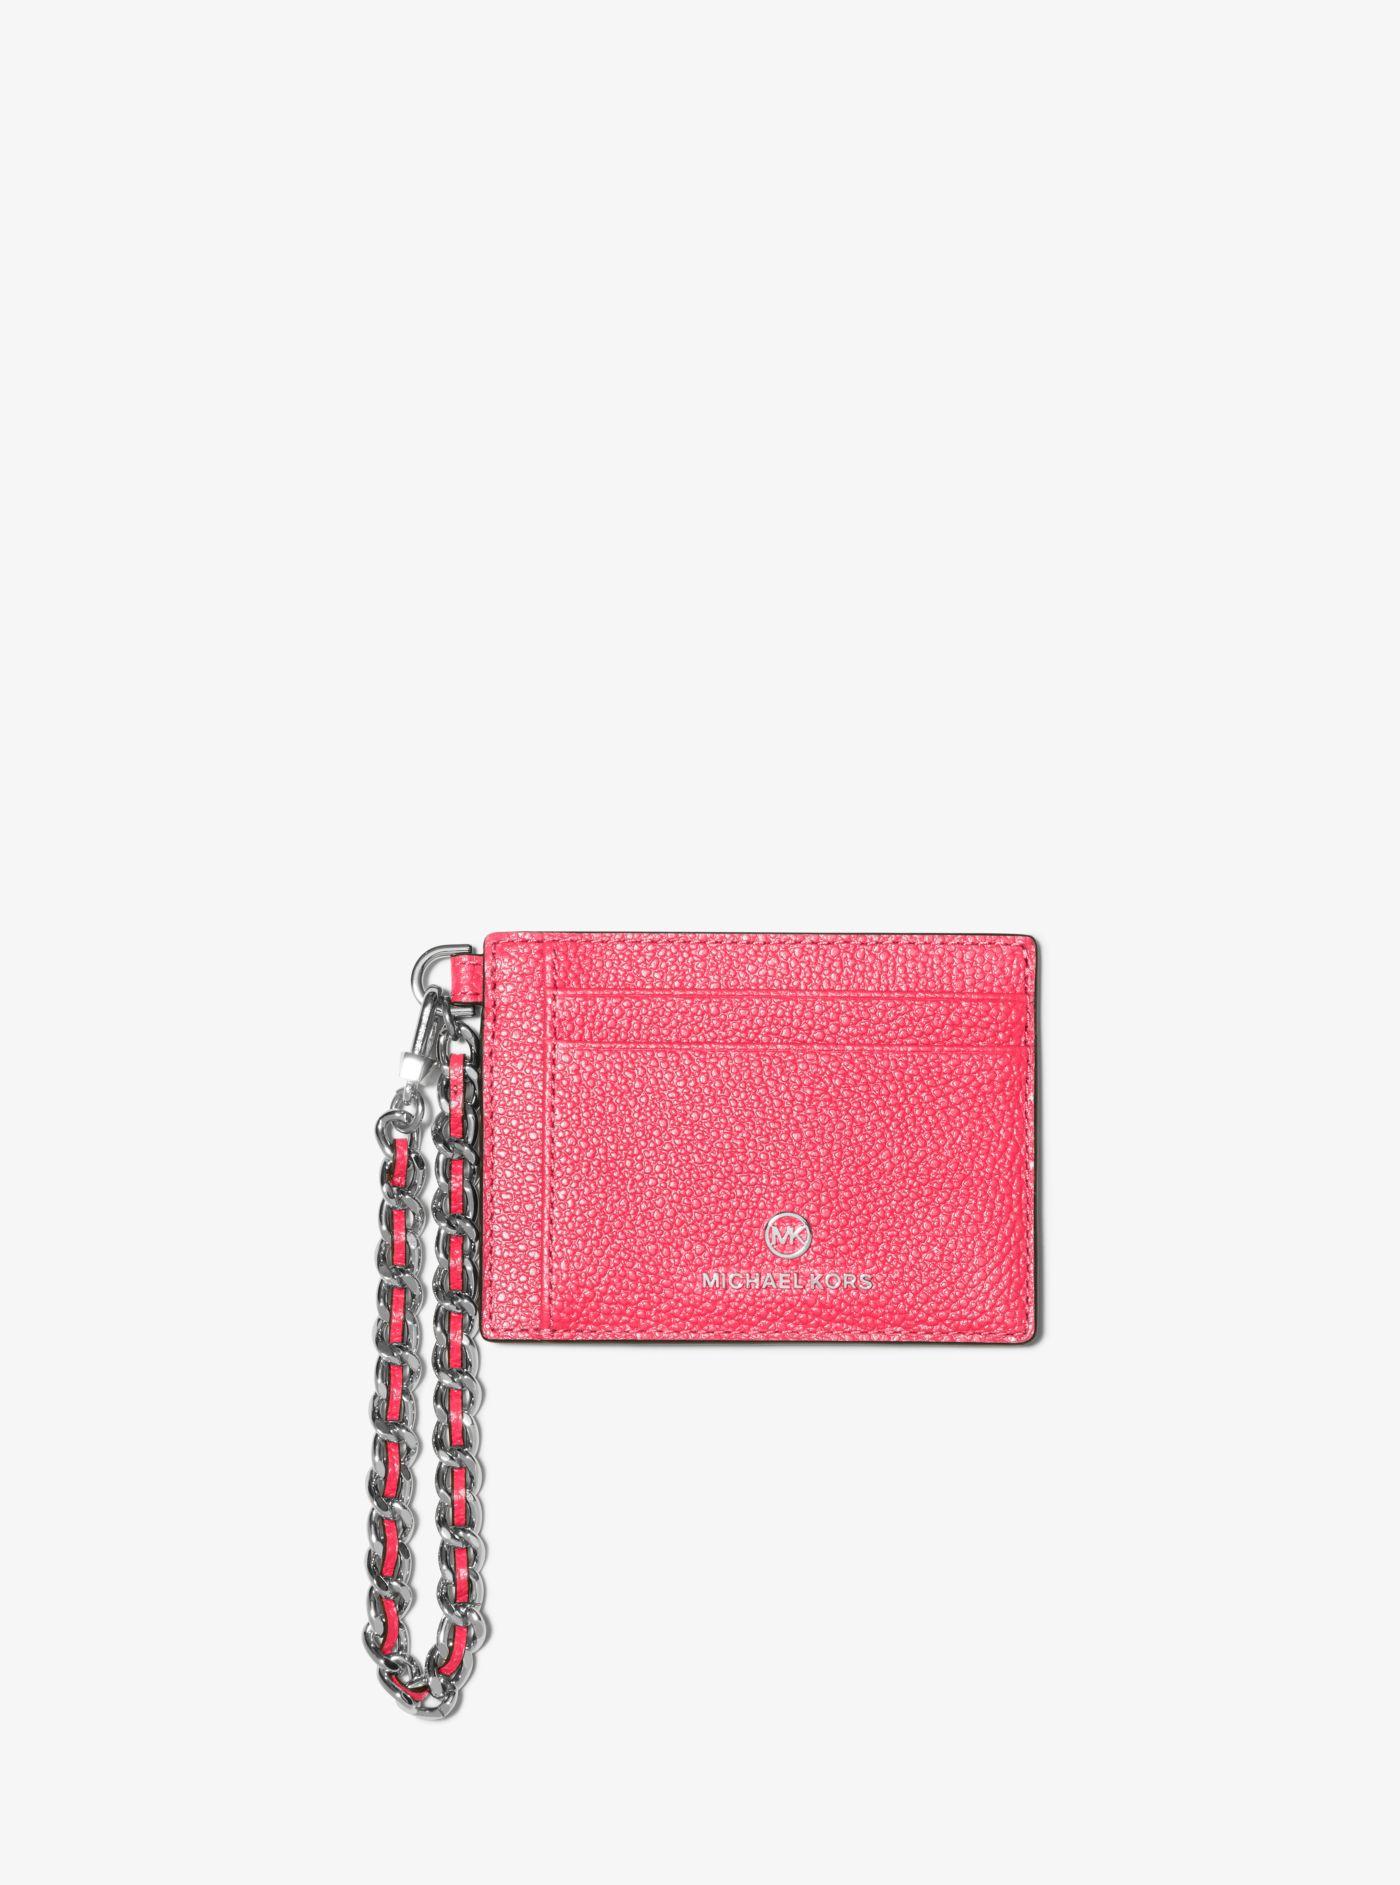 Michael Kors Small Pebbled Leather Chain Card Case in Pink | Lyst